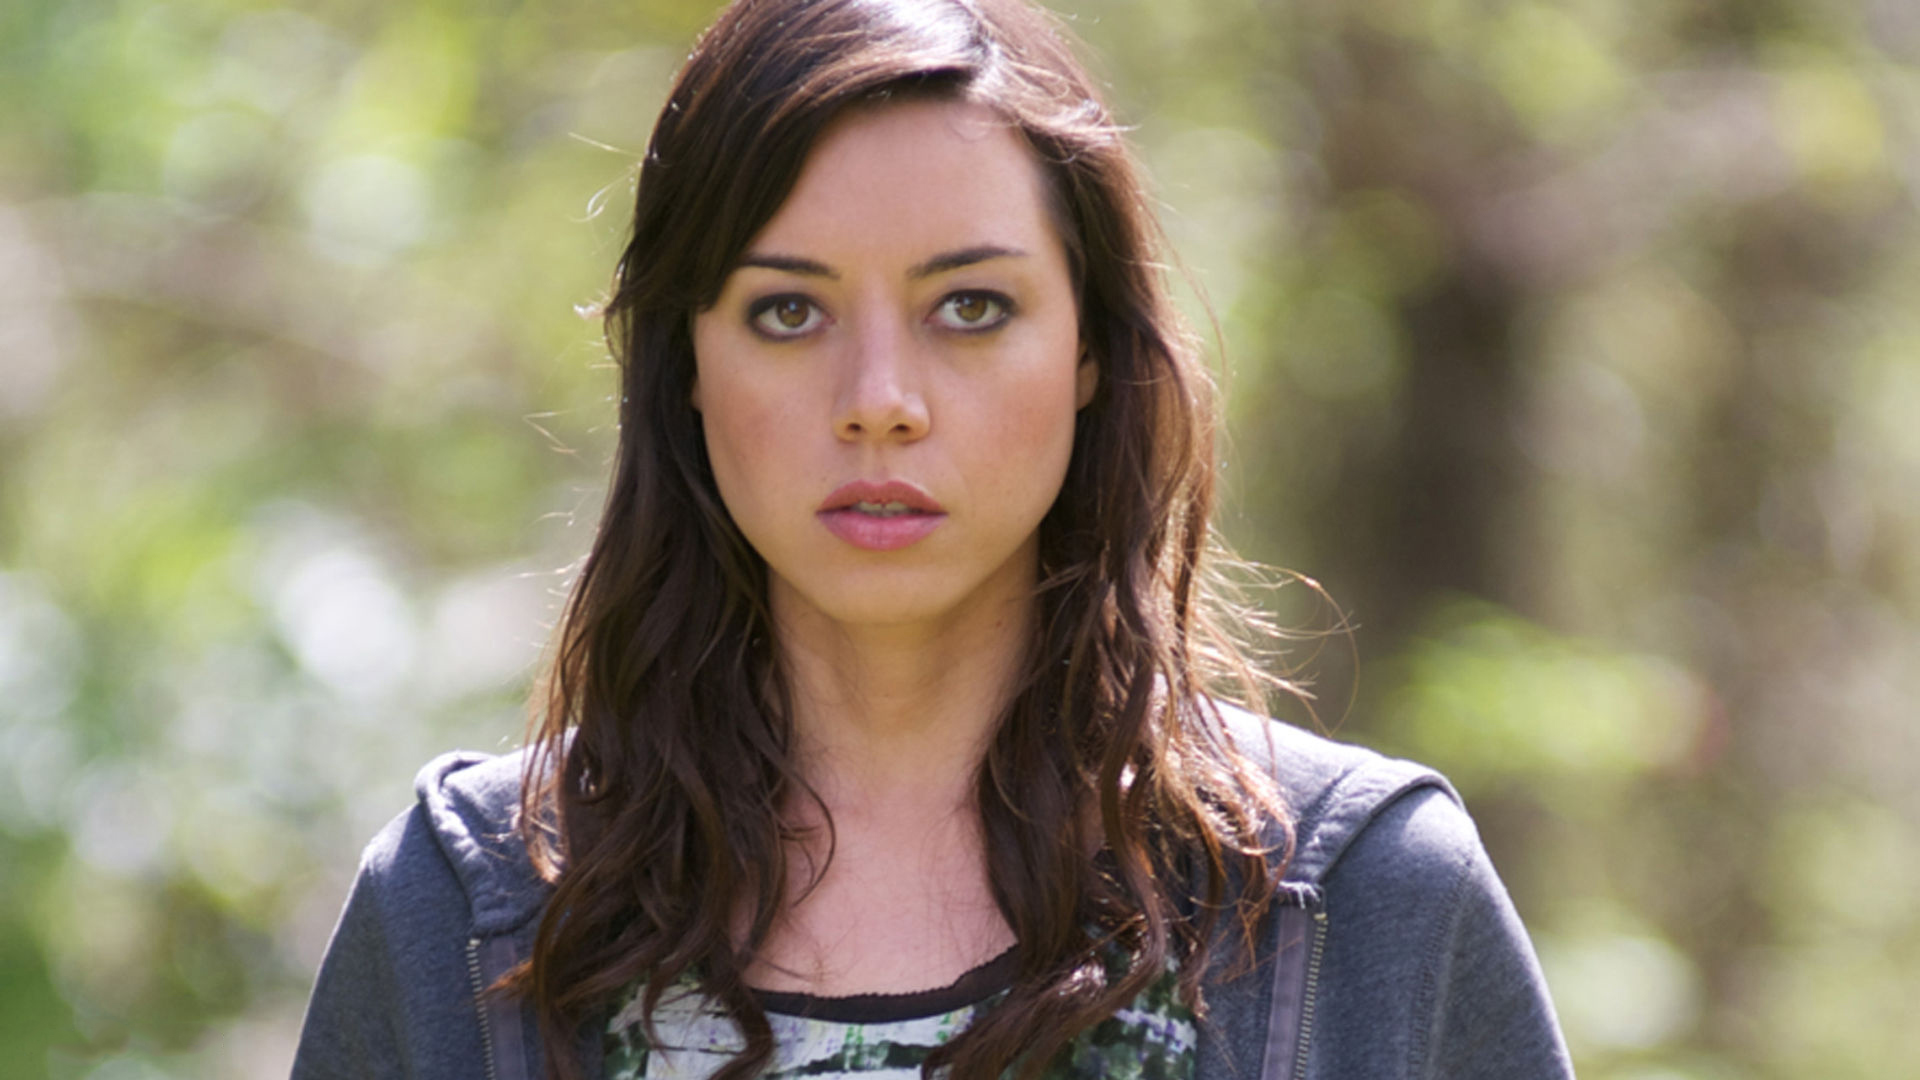 The role of April Ludgate was specifically created for Aubrey Plaza, after 

the casting director met her and felt she was, "weirdest girl I’ve ever met 

in my life."